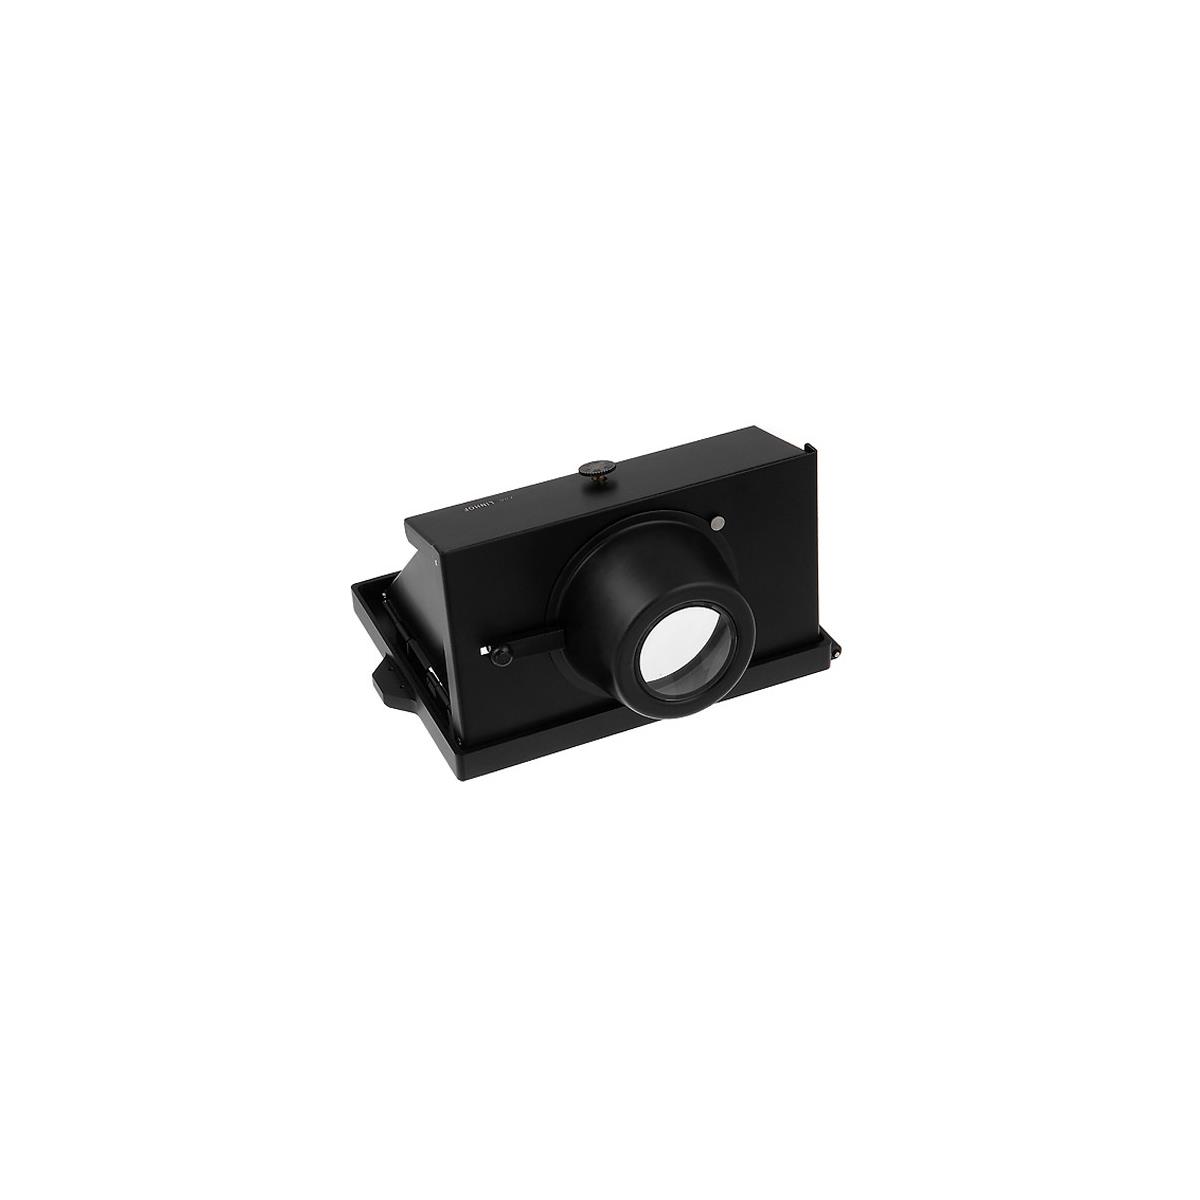 Image of Fotodiox Pro Right Angle View Finder Hood for 4x5 Linhof View Camera